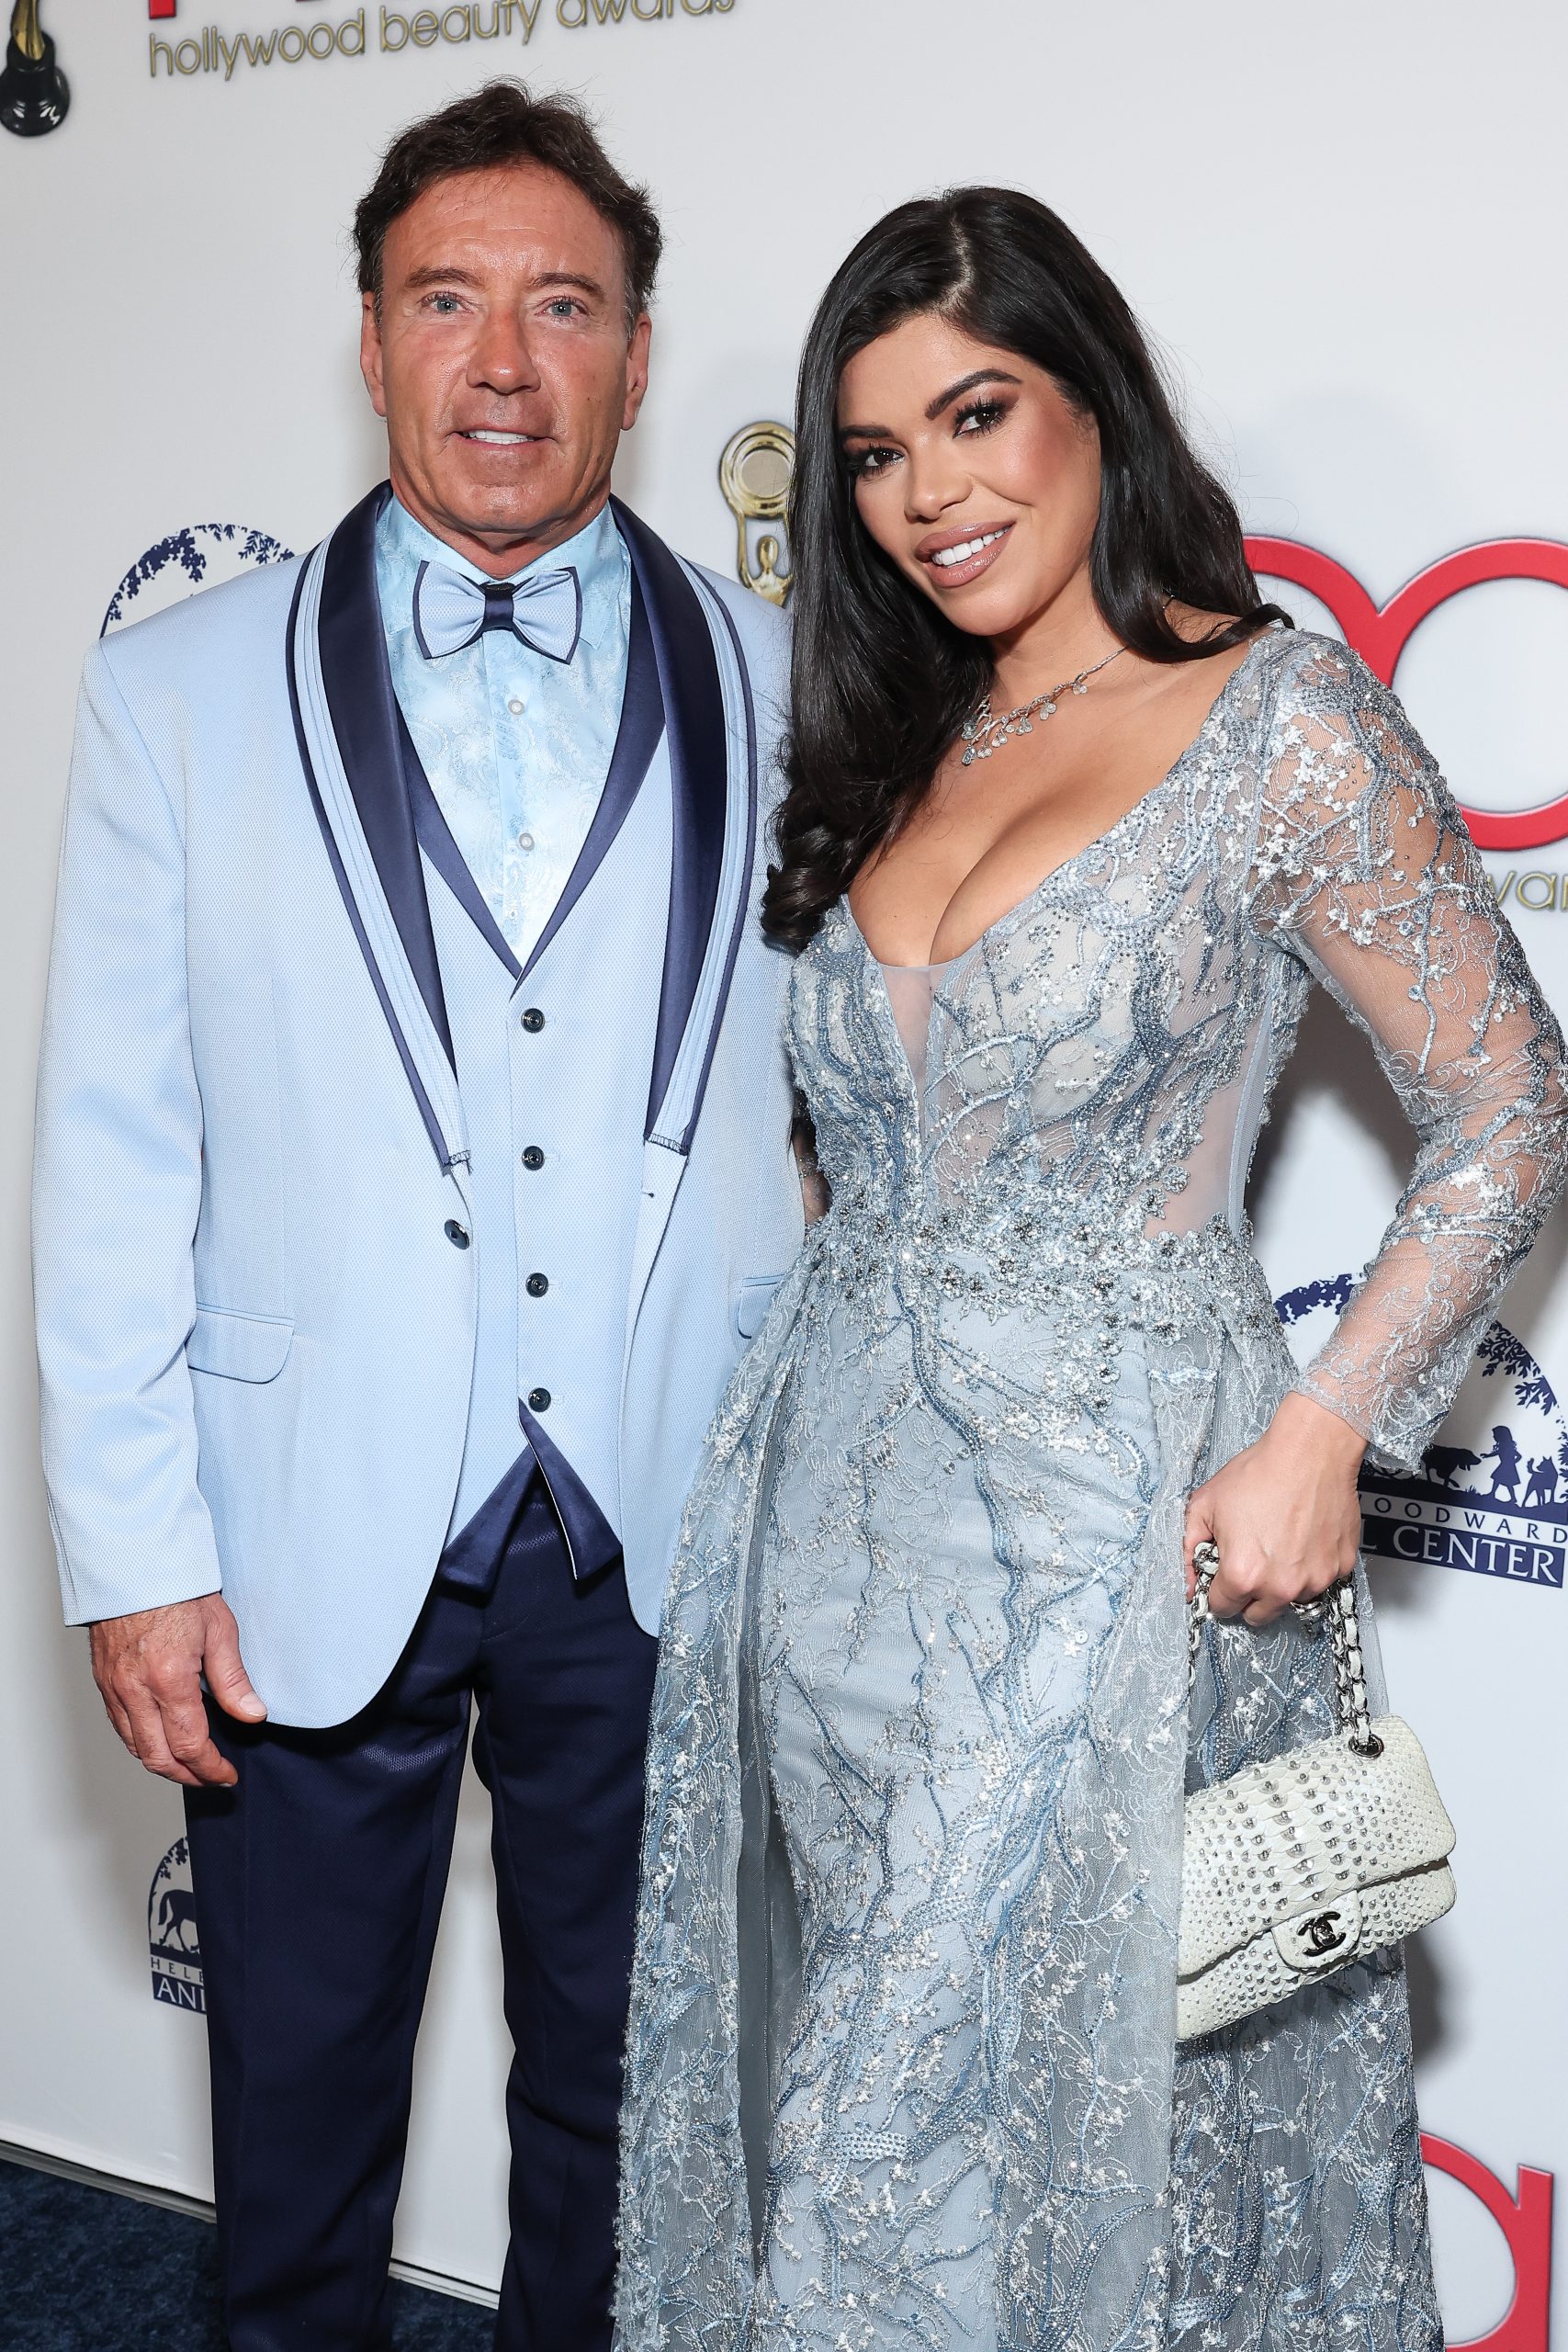 suelyn fisher, dr. garth fisher, Hollywood Beauty Awards